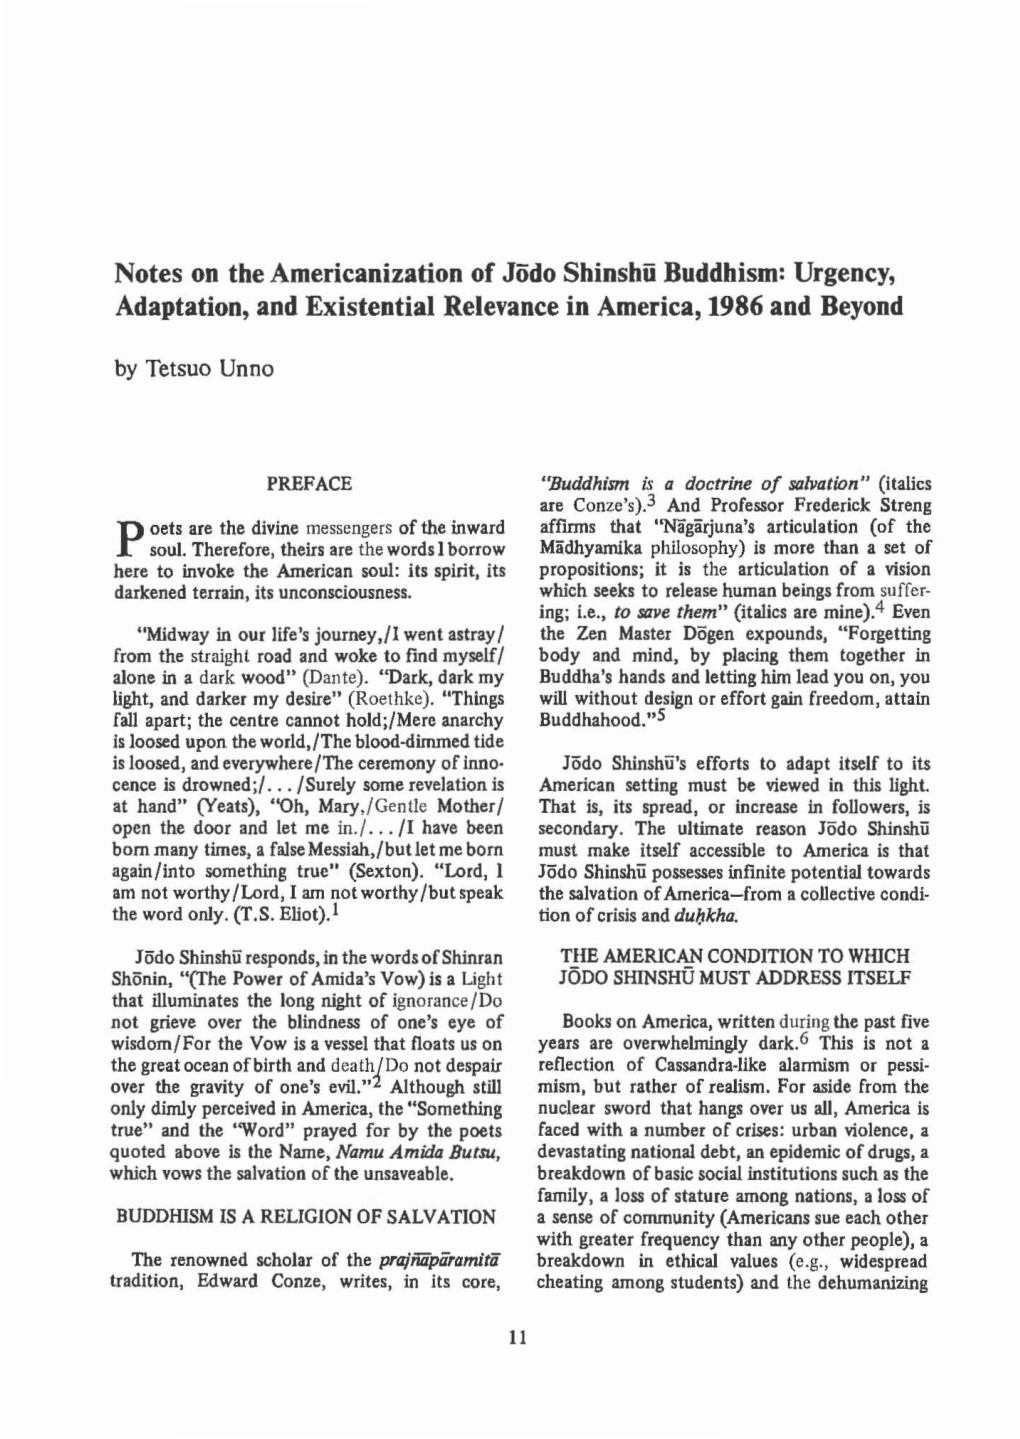 Notes on the Americanization of Jiido Shinshii Buddhism: Urgency, Adaptation, and Existential Relevance in America, 1986 and Beyond